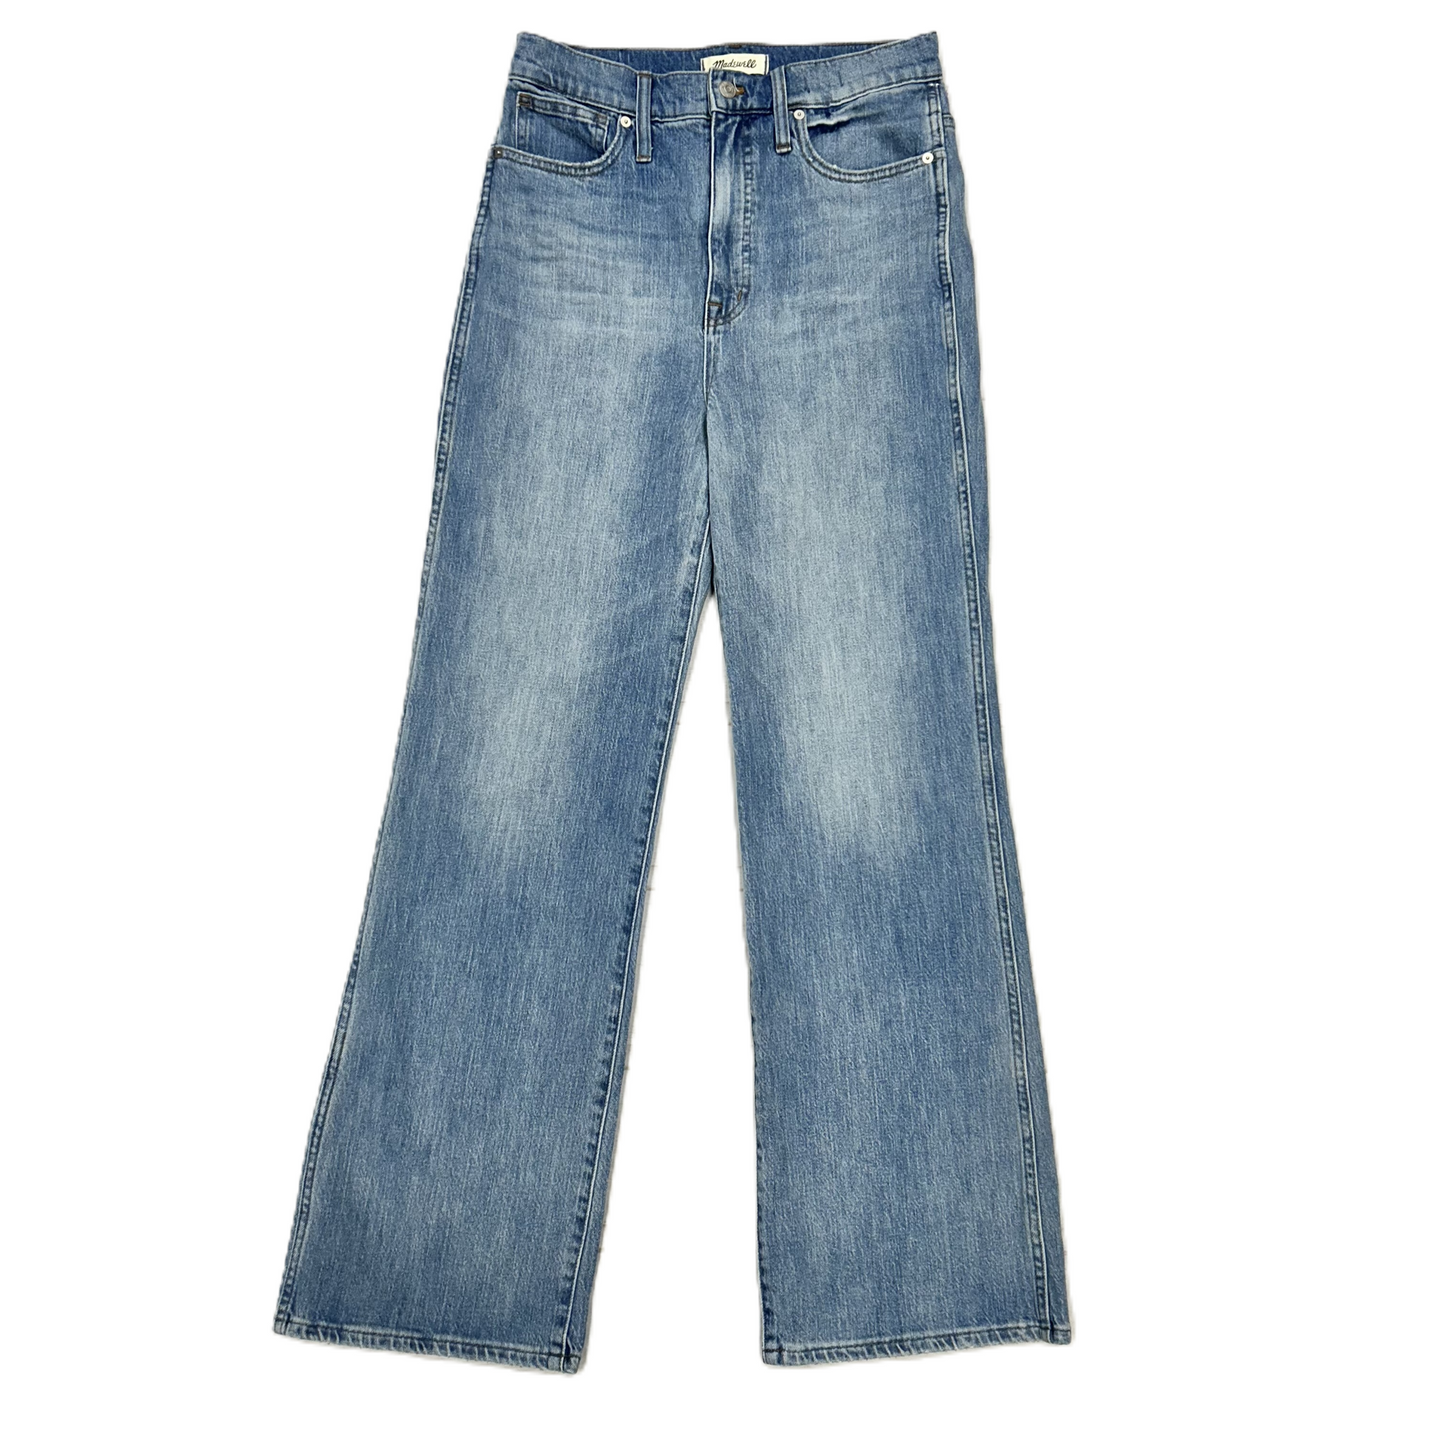 Blue Denim Jeans Flared By Madewell, Size: 10